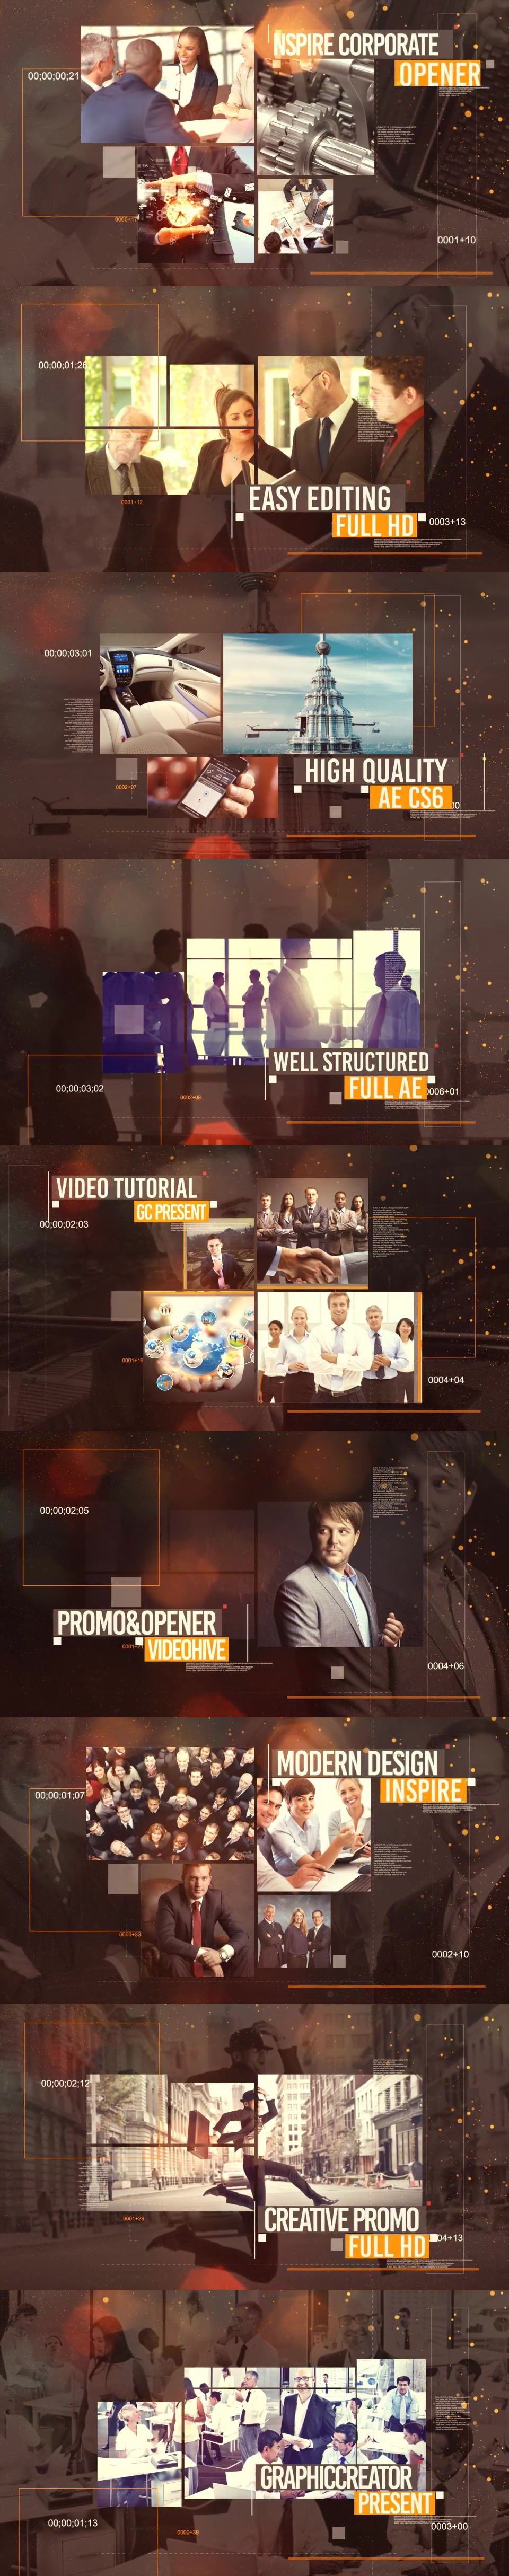 Videohive - Inspire Corporate V2 15777244 - Free Download 